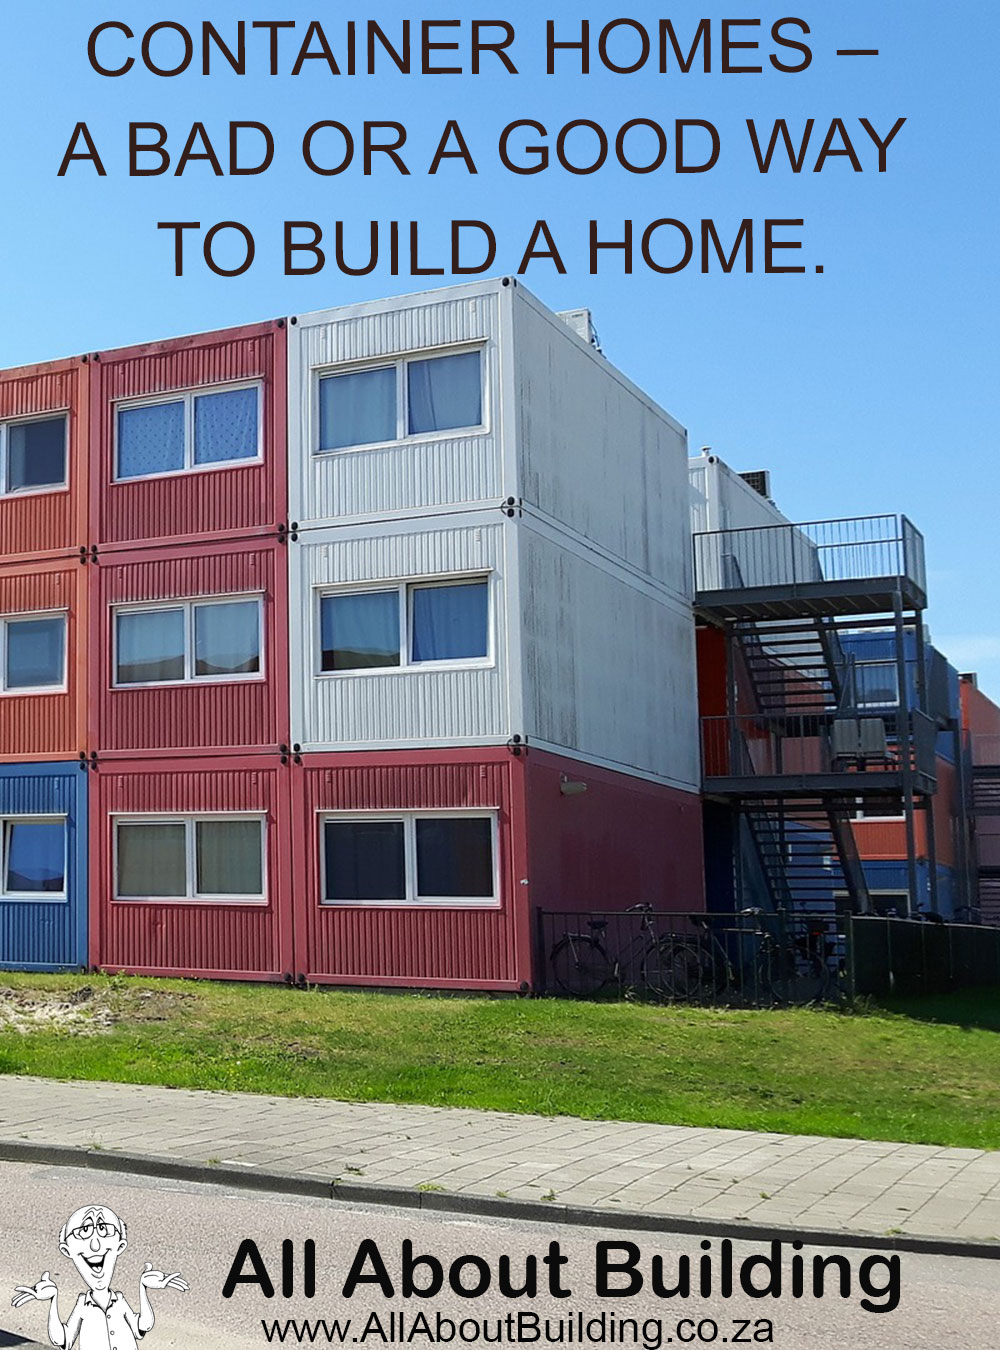 CONTAINER HOMES A BAD OR A GOOD WAY TO BUILD A HOME